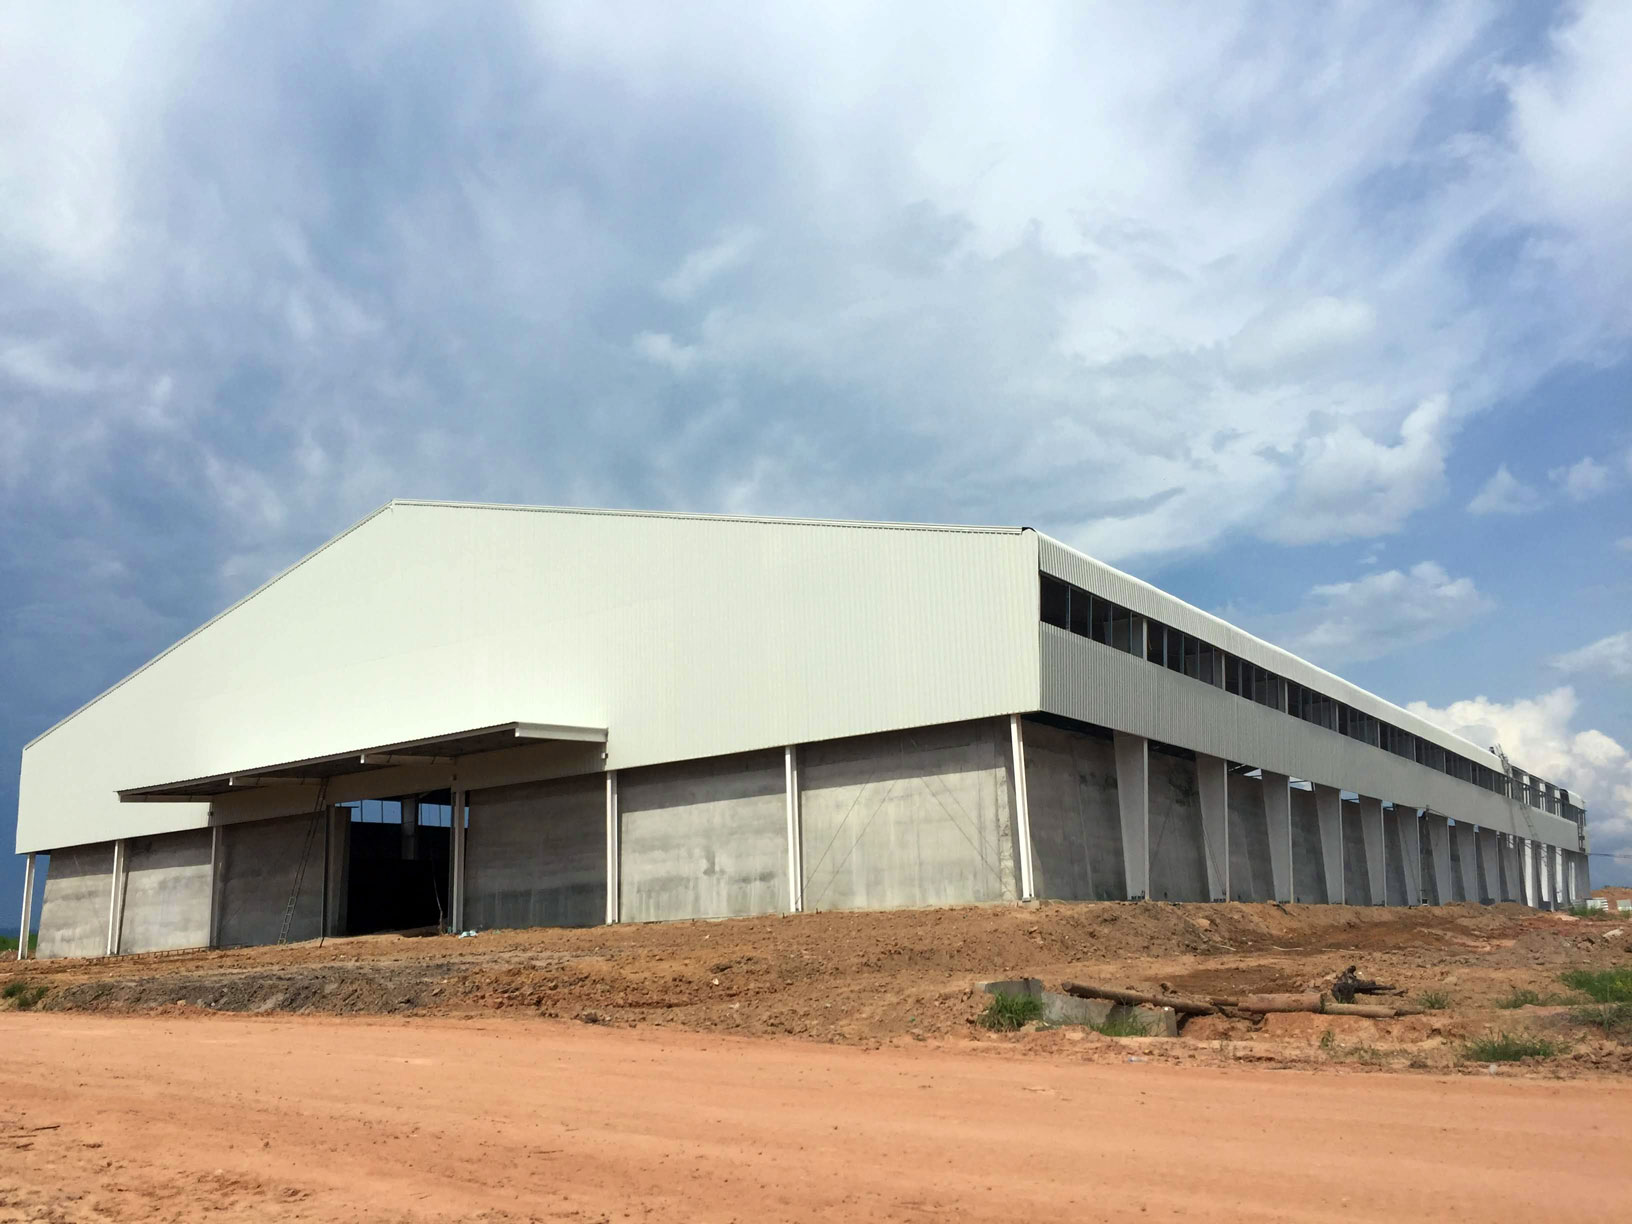 Thailand's prefabricated steel sugar factory project